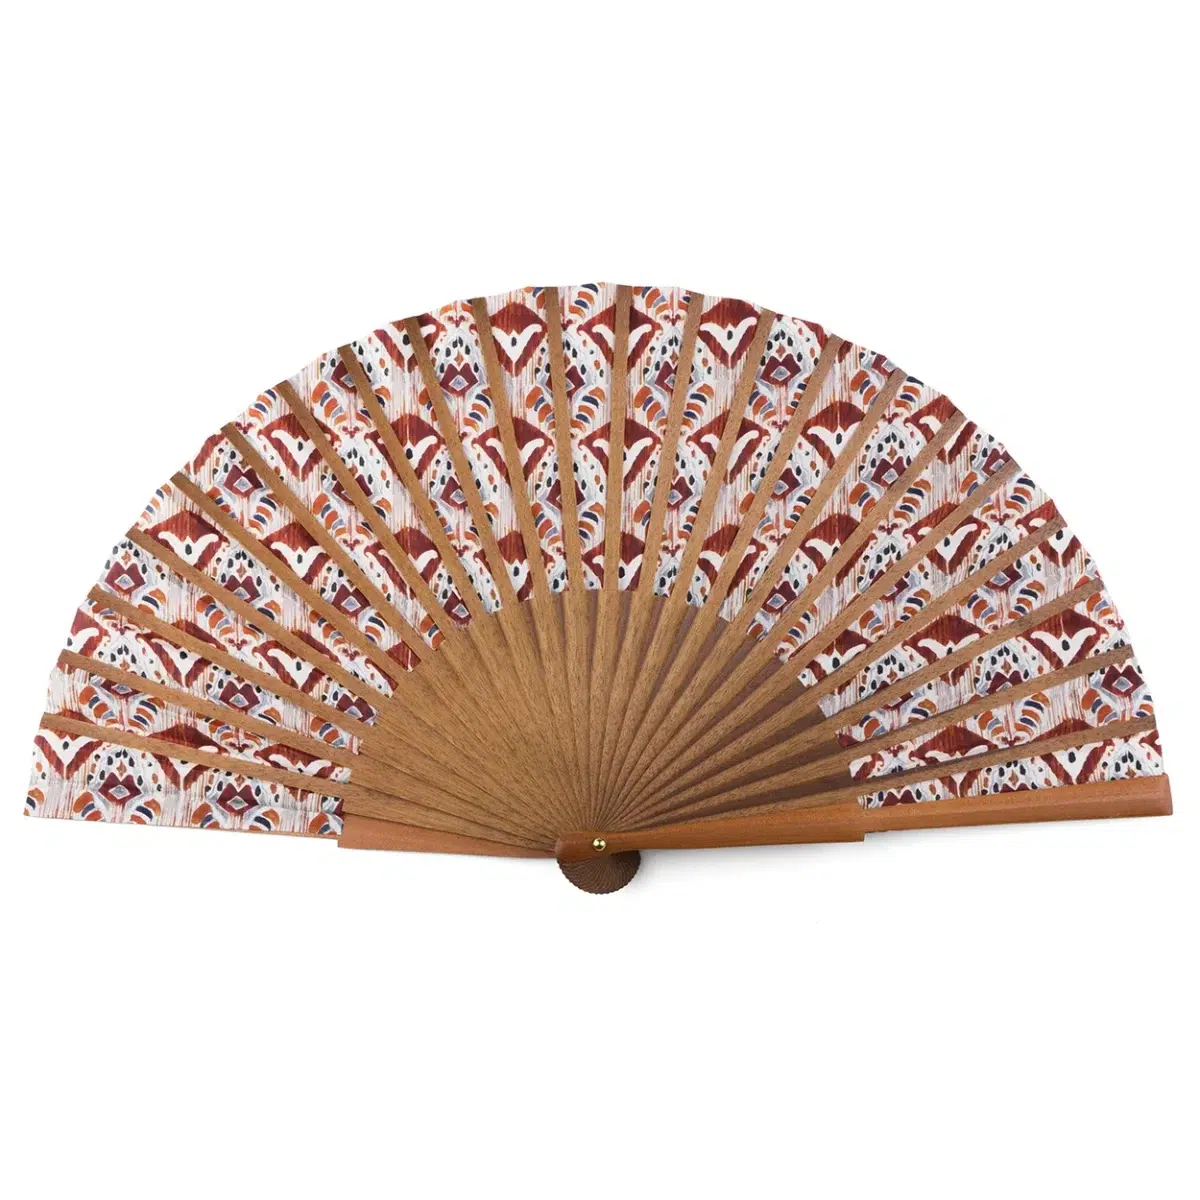 Silk and Wood Fan with White and Red Print Inspired by the Designs of Bali and Indonesia.